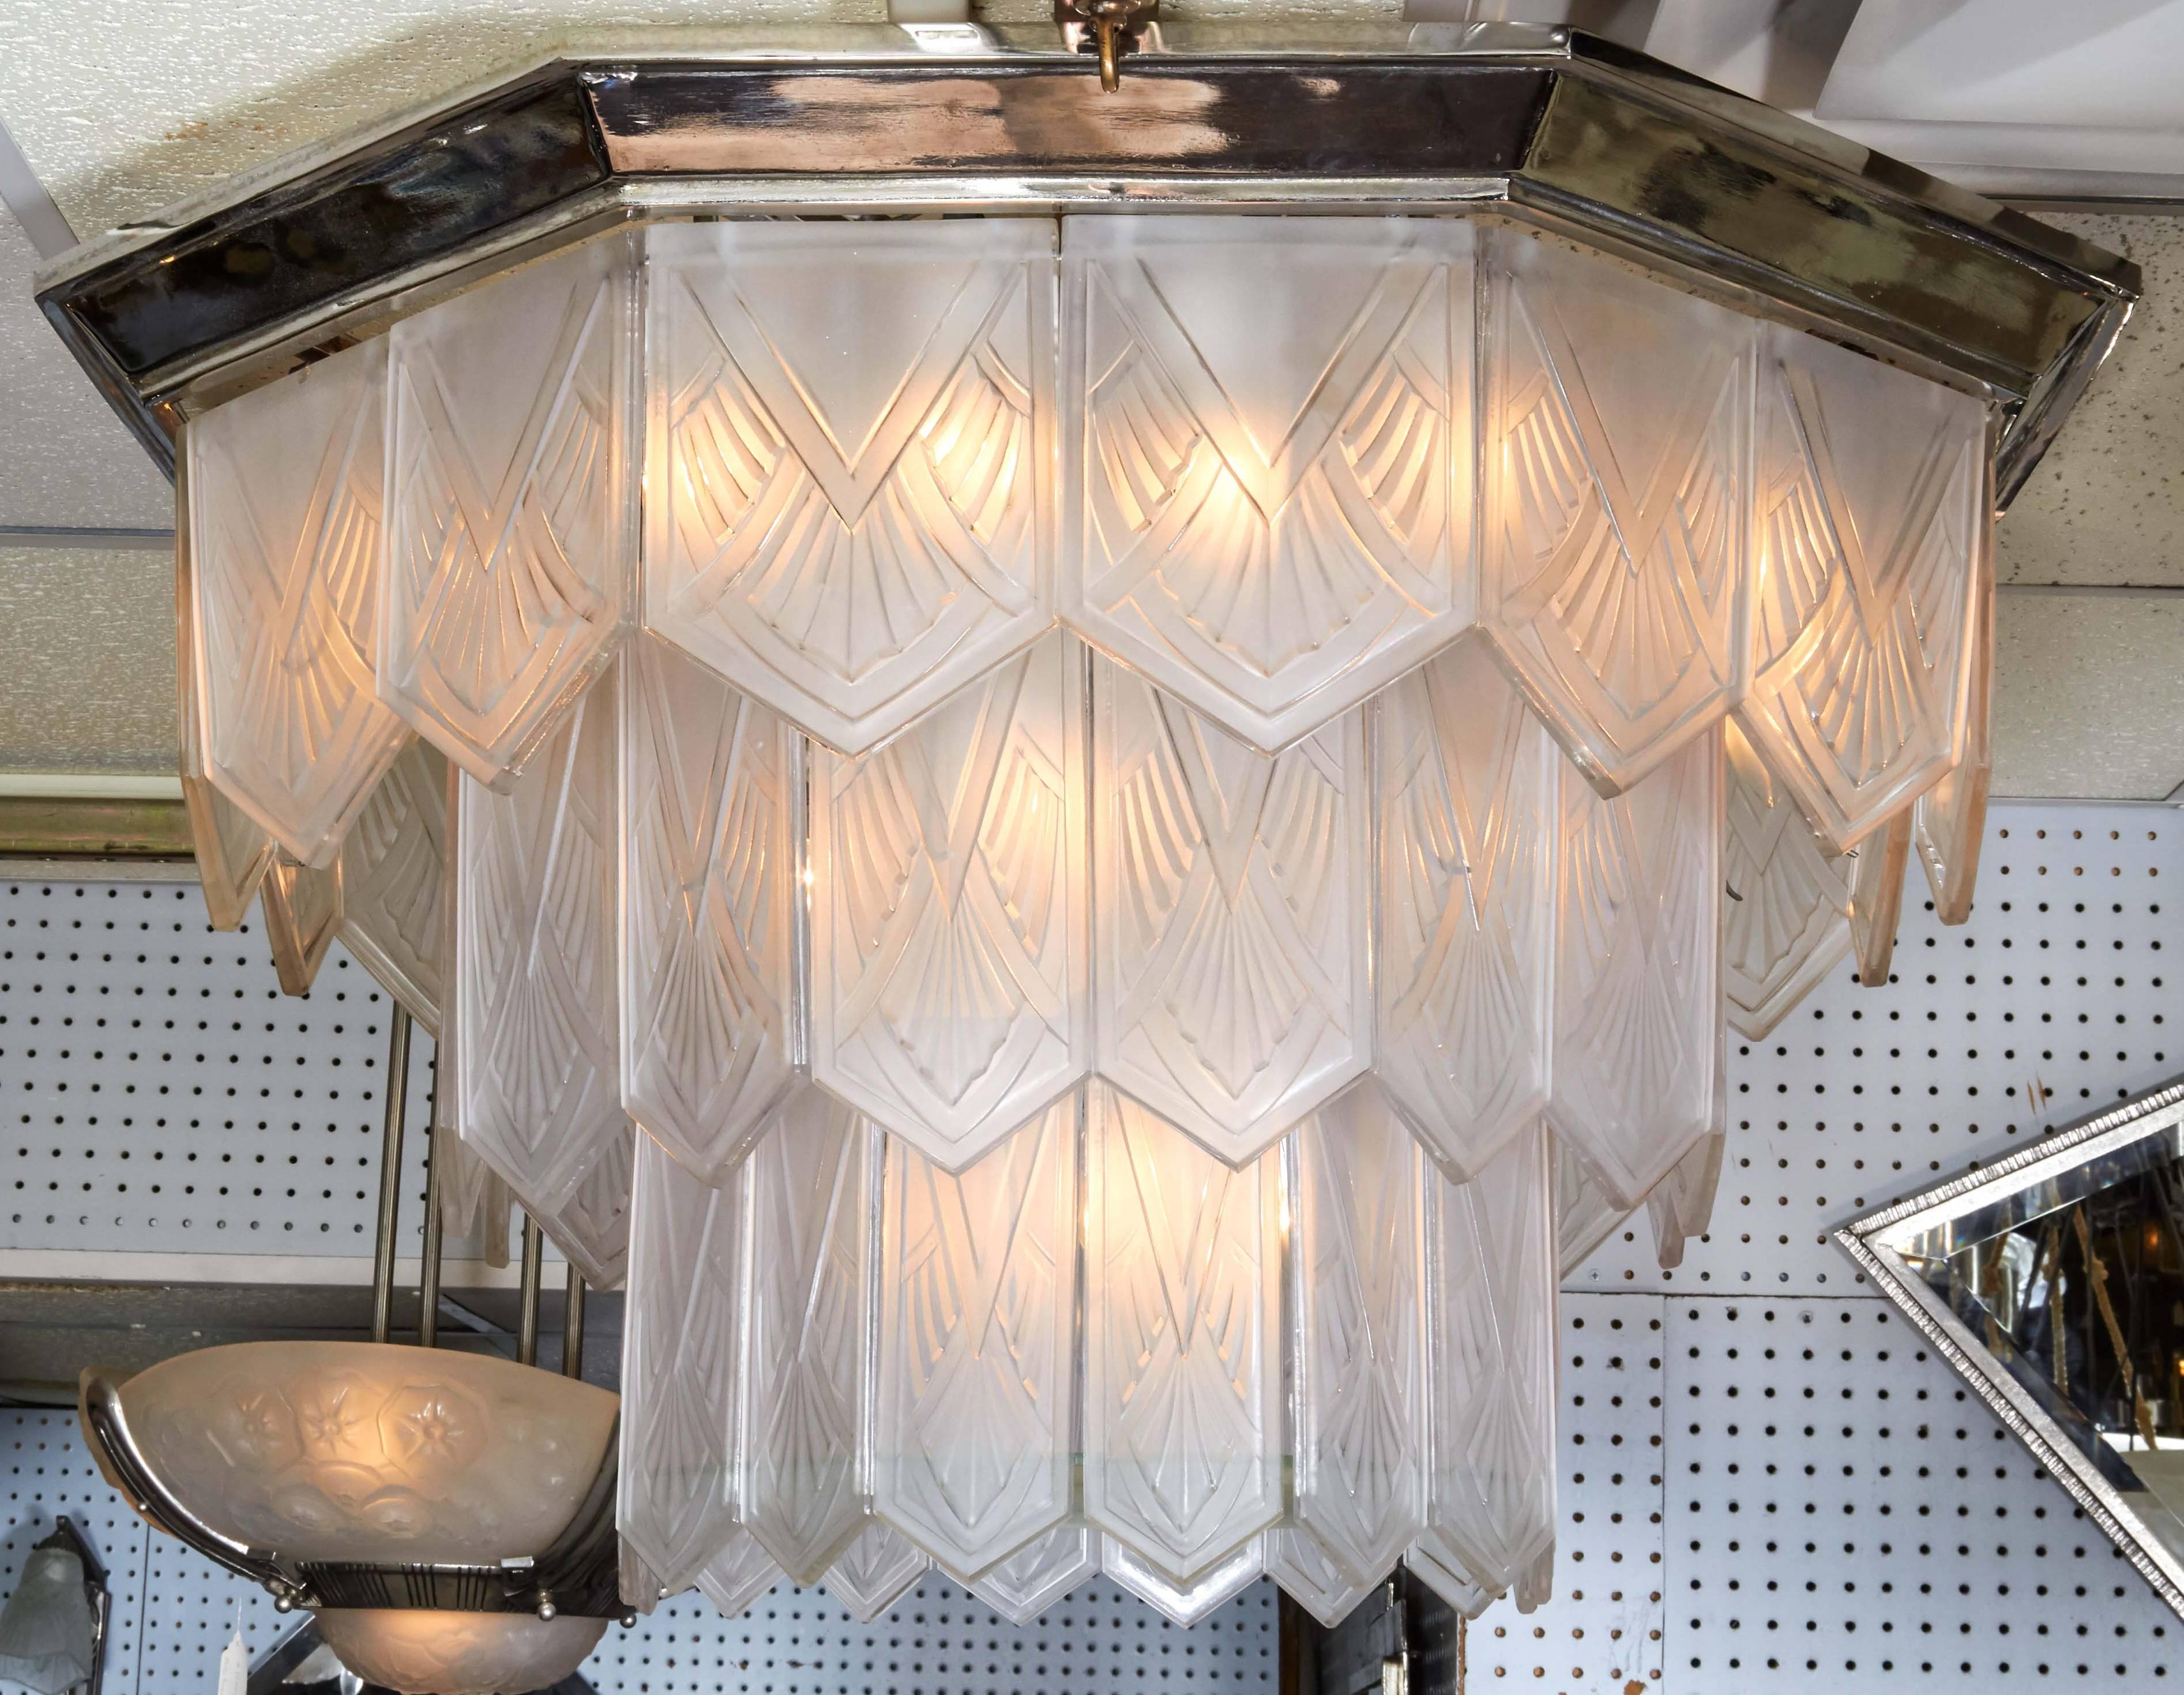 Enormous and spectacular French Art Deco chandelier by Sabino. Three tiers of varied size molded art glass panels in a waterfall design typifies this architecturally Modern looking chandelier. The cascading frosted and polished geometric patterned